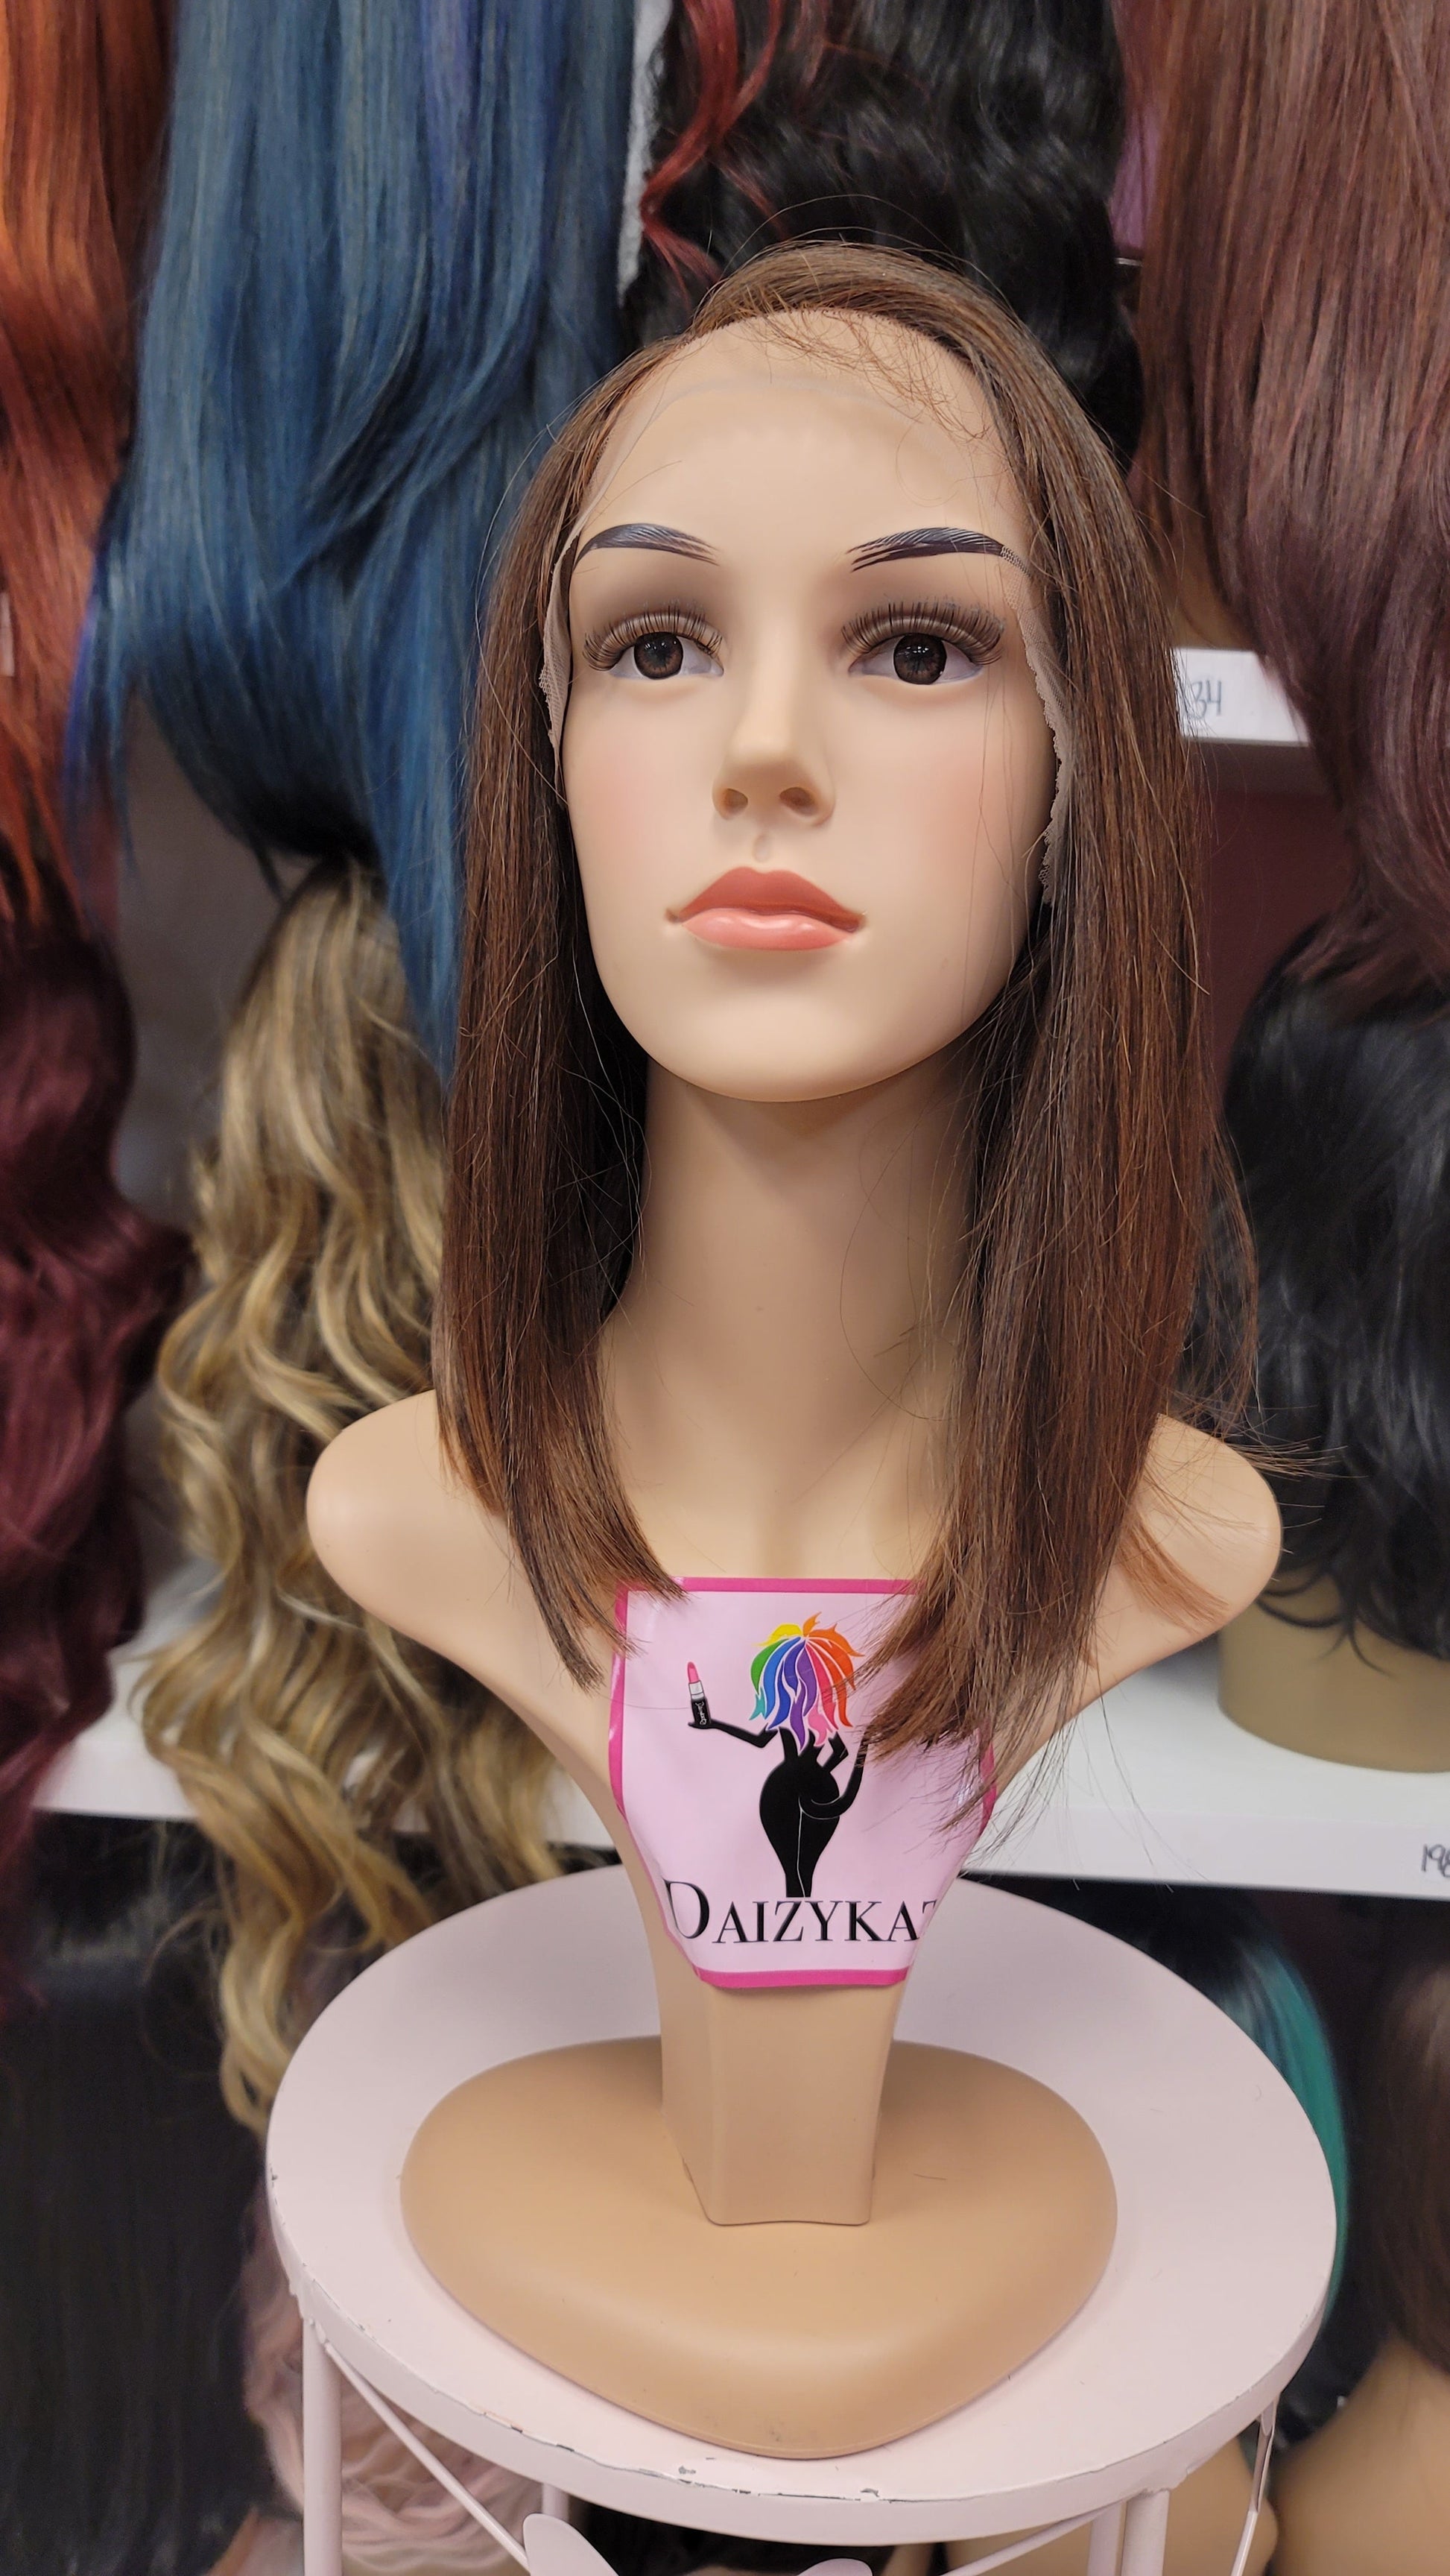 250 EVE - Middle Part Lace Front Wig - 1B/30 - DaizyKat Cosmetics 250 EVE - Middle Part Lace Front Wig - 1B/30 DaizyKat Cosmetics Wigs